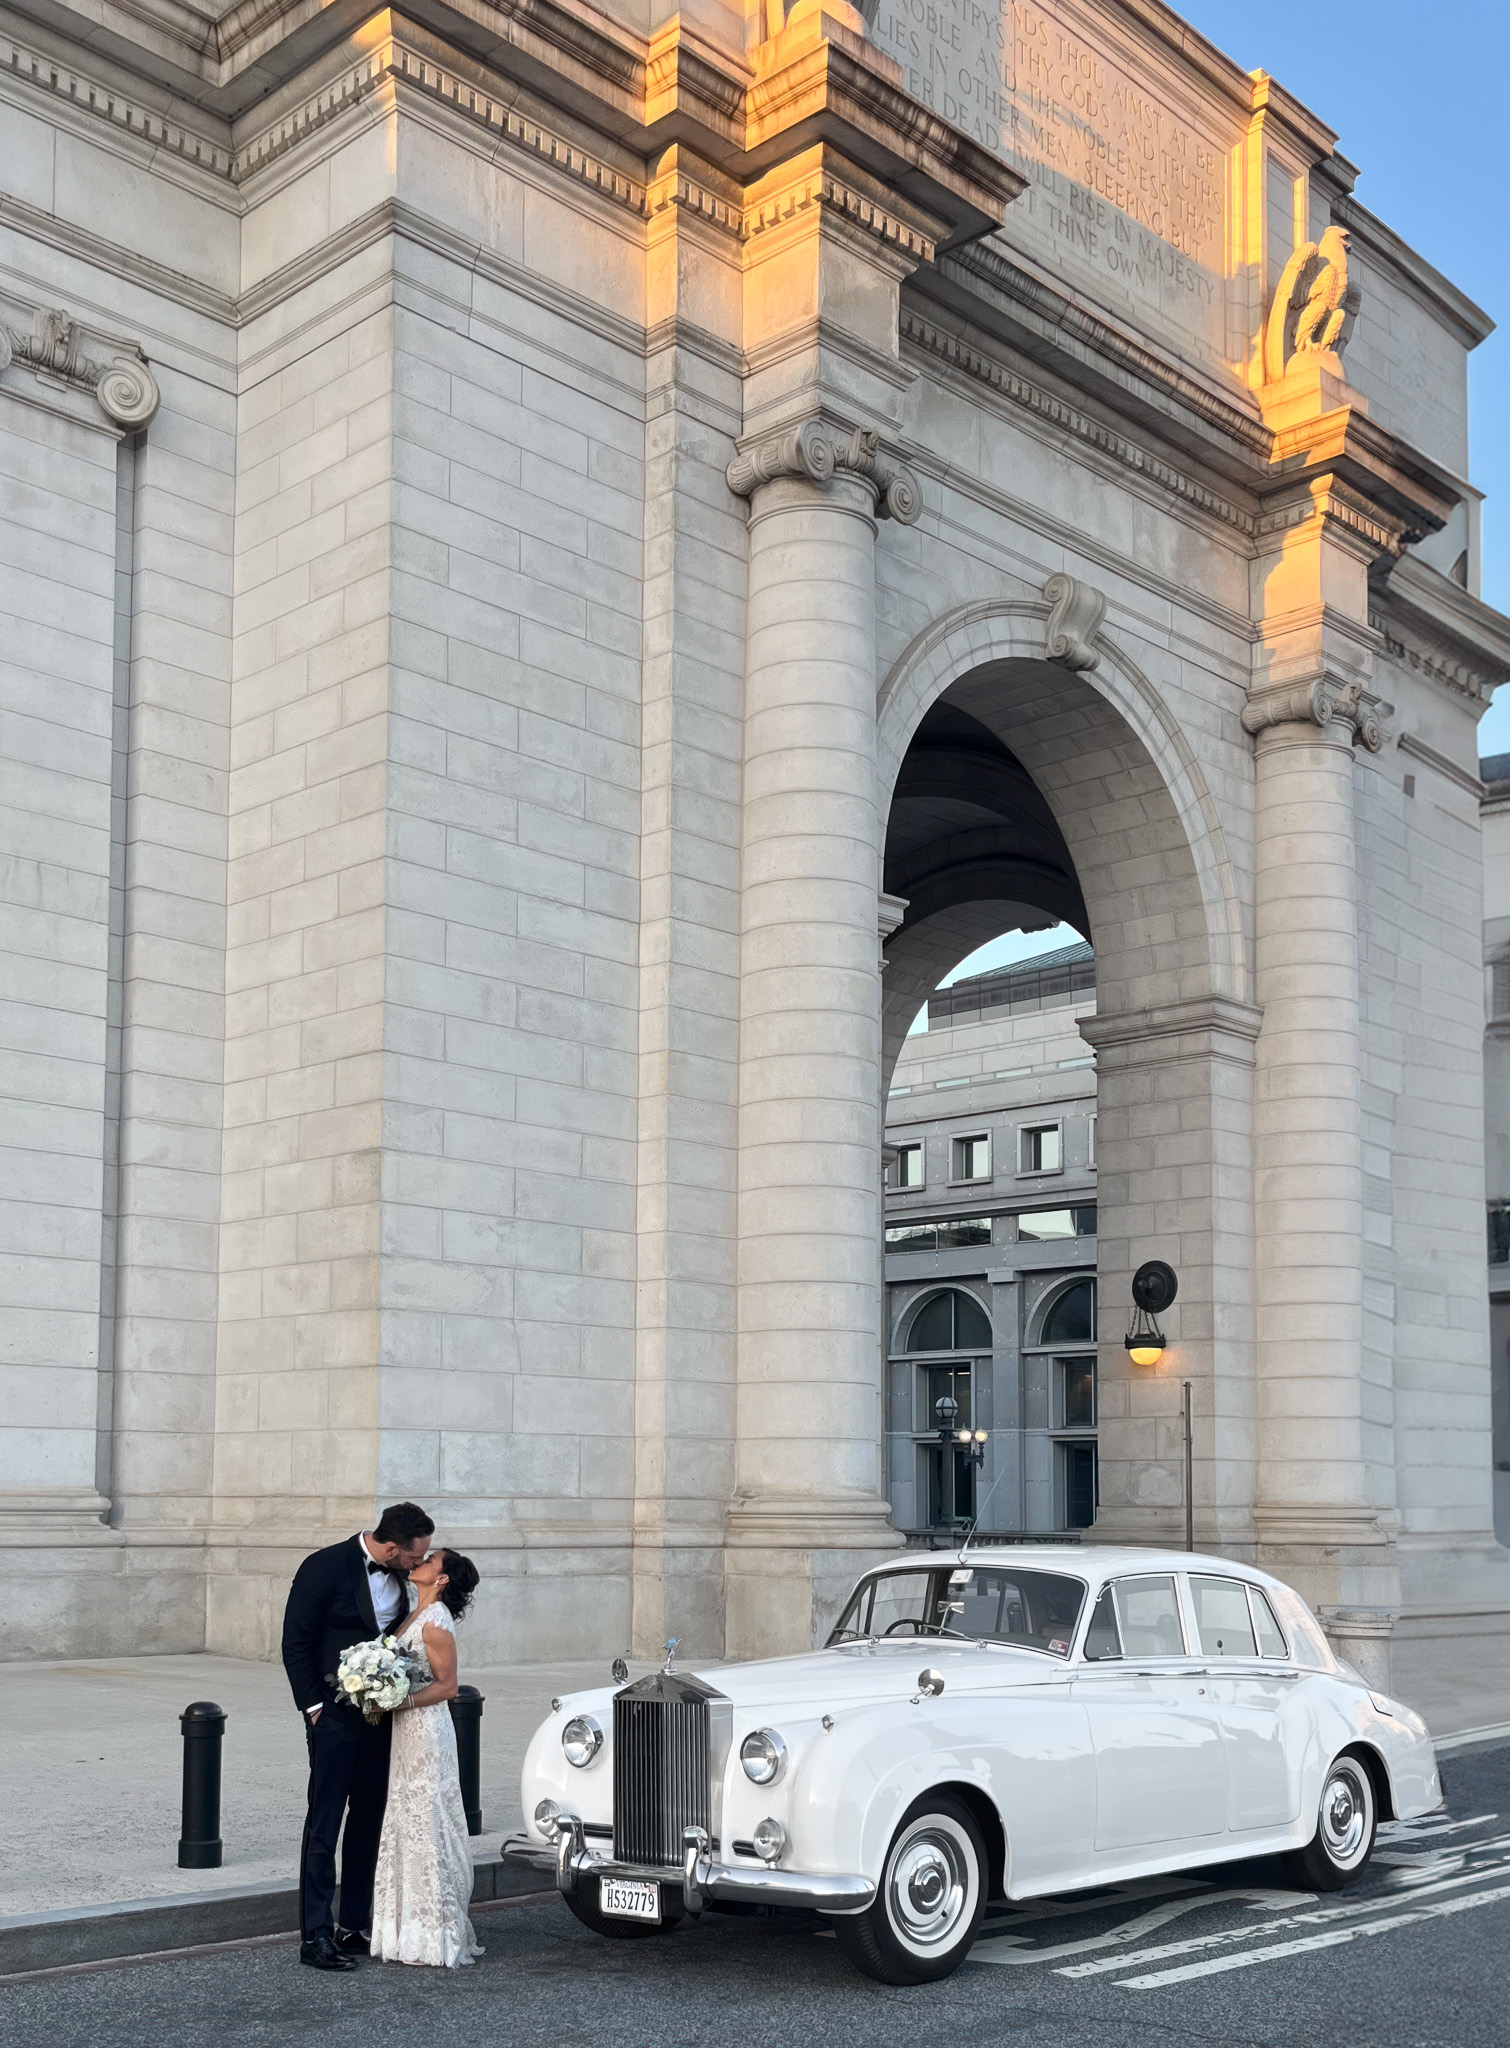 Phoro of a white Rolls Royce in front of Union Station in Washington DC